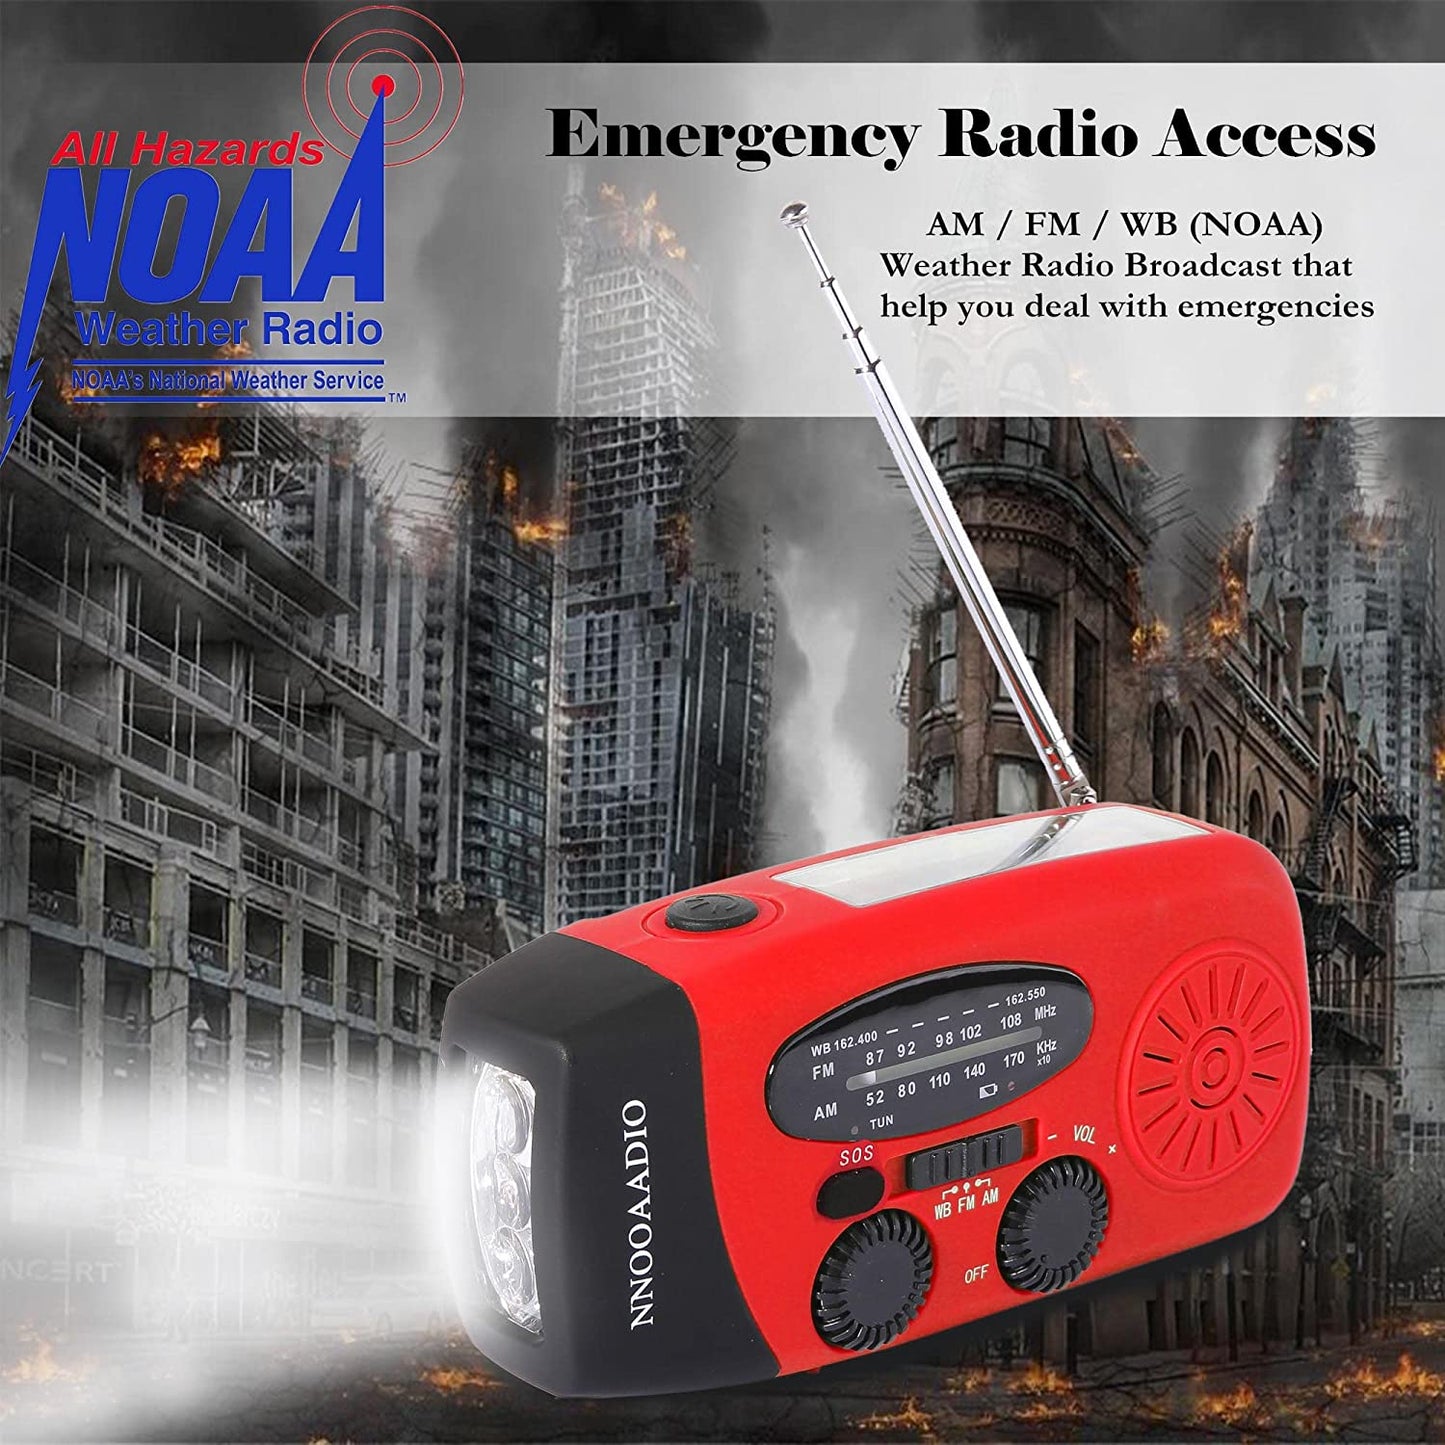 2000mAh Portable Emergency Weather Radio with SOS Alarm, Hand Crank and Solar Battery Charging, NOAA AM/FM, Cell Phone Charger & Survival Kit 